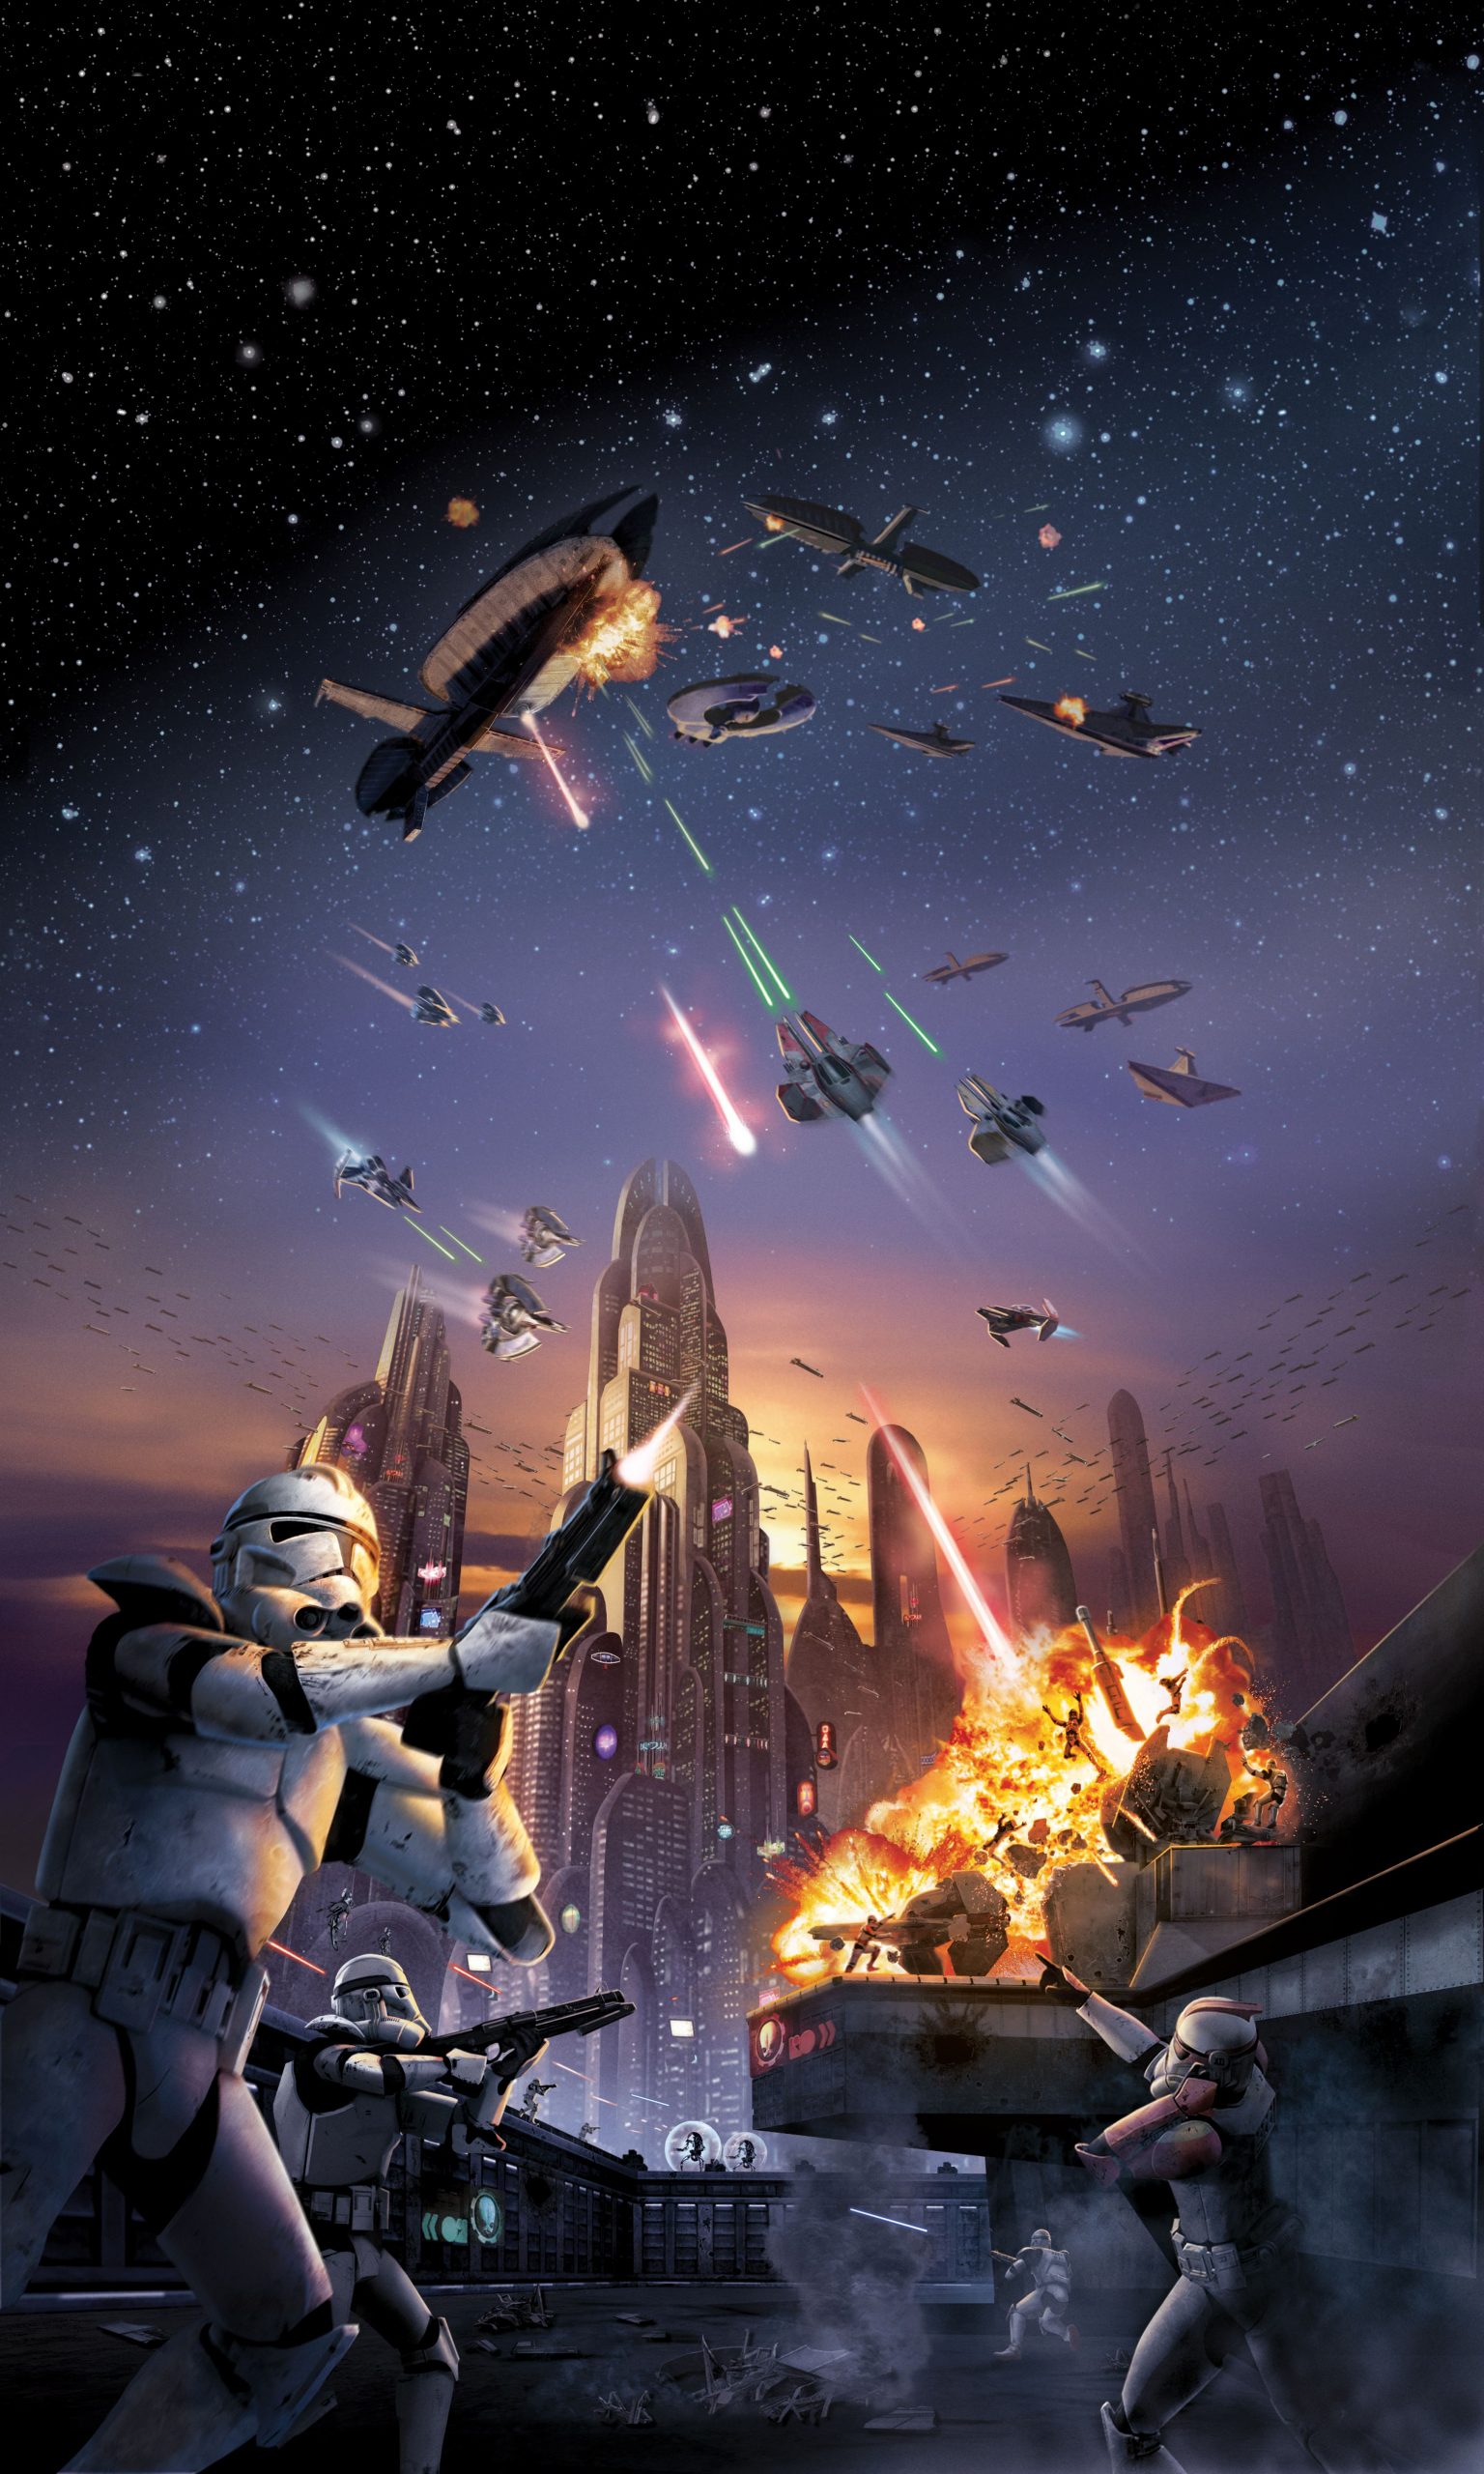 A poster of star wars with soldiers and planes - Star Wars